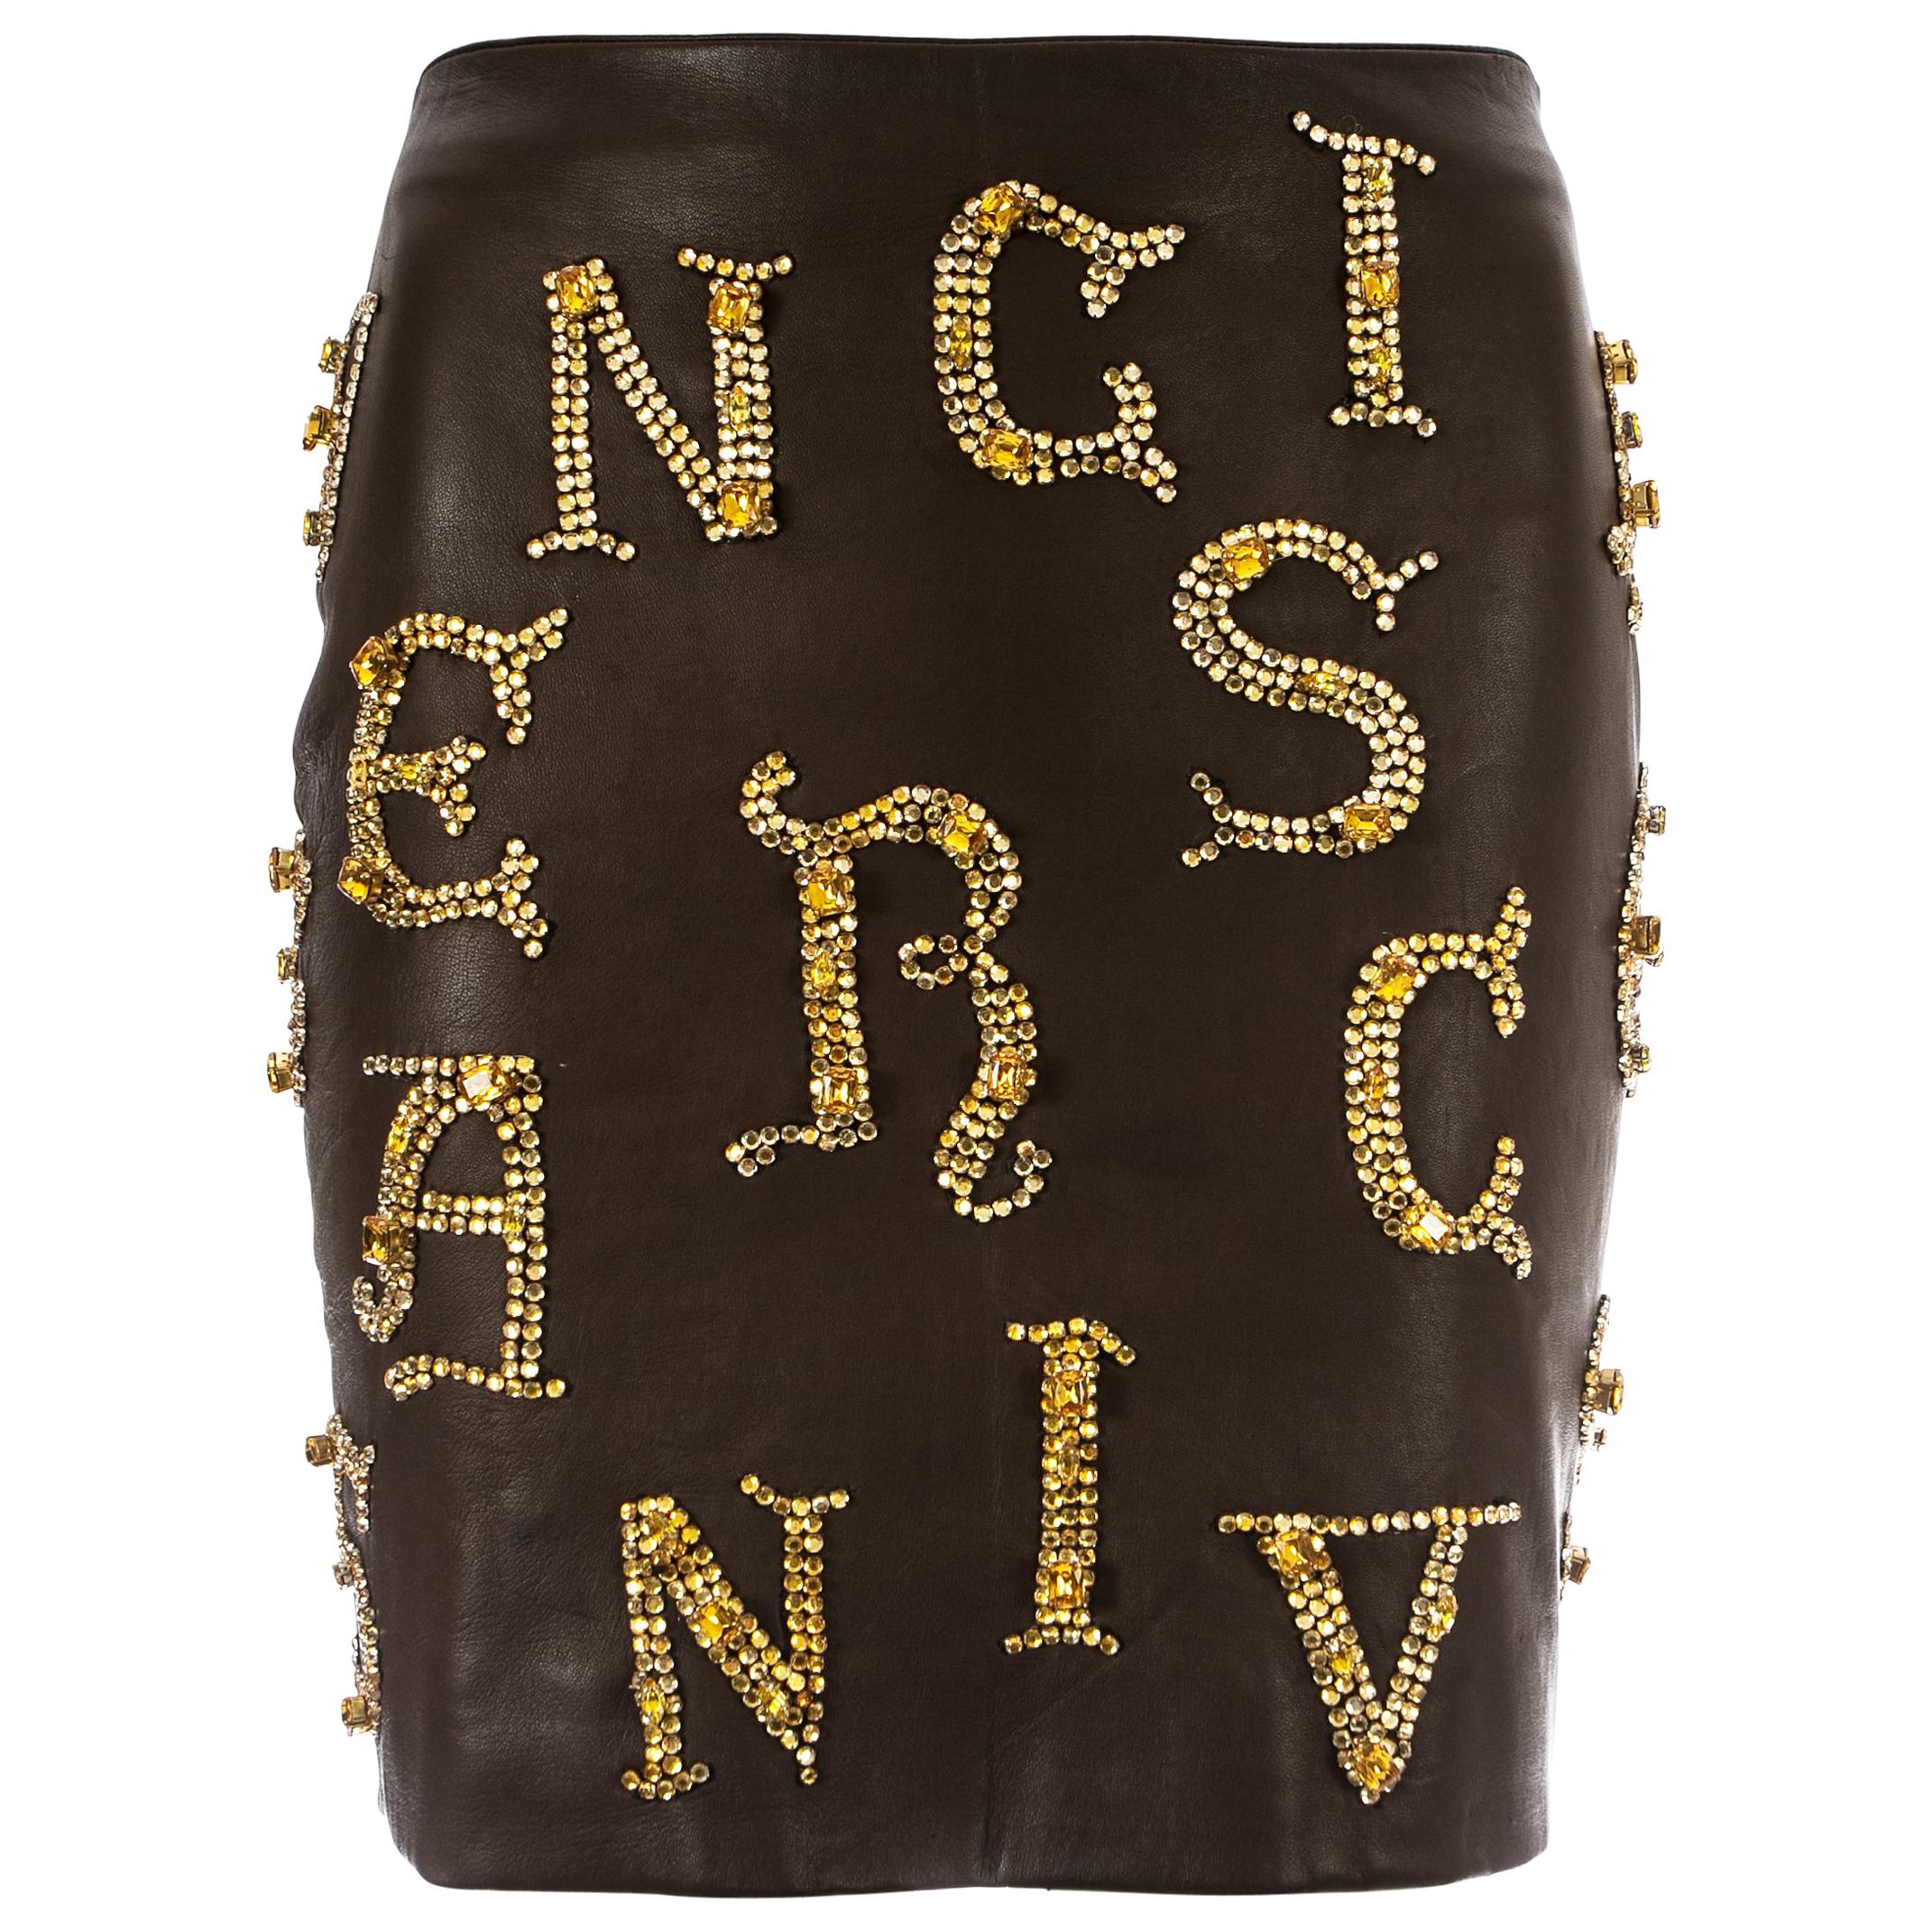 Gianni Versace brown leather skirt with gold crystal embellishment, fw 1997 For Sale